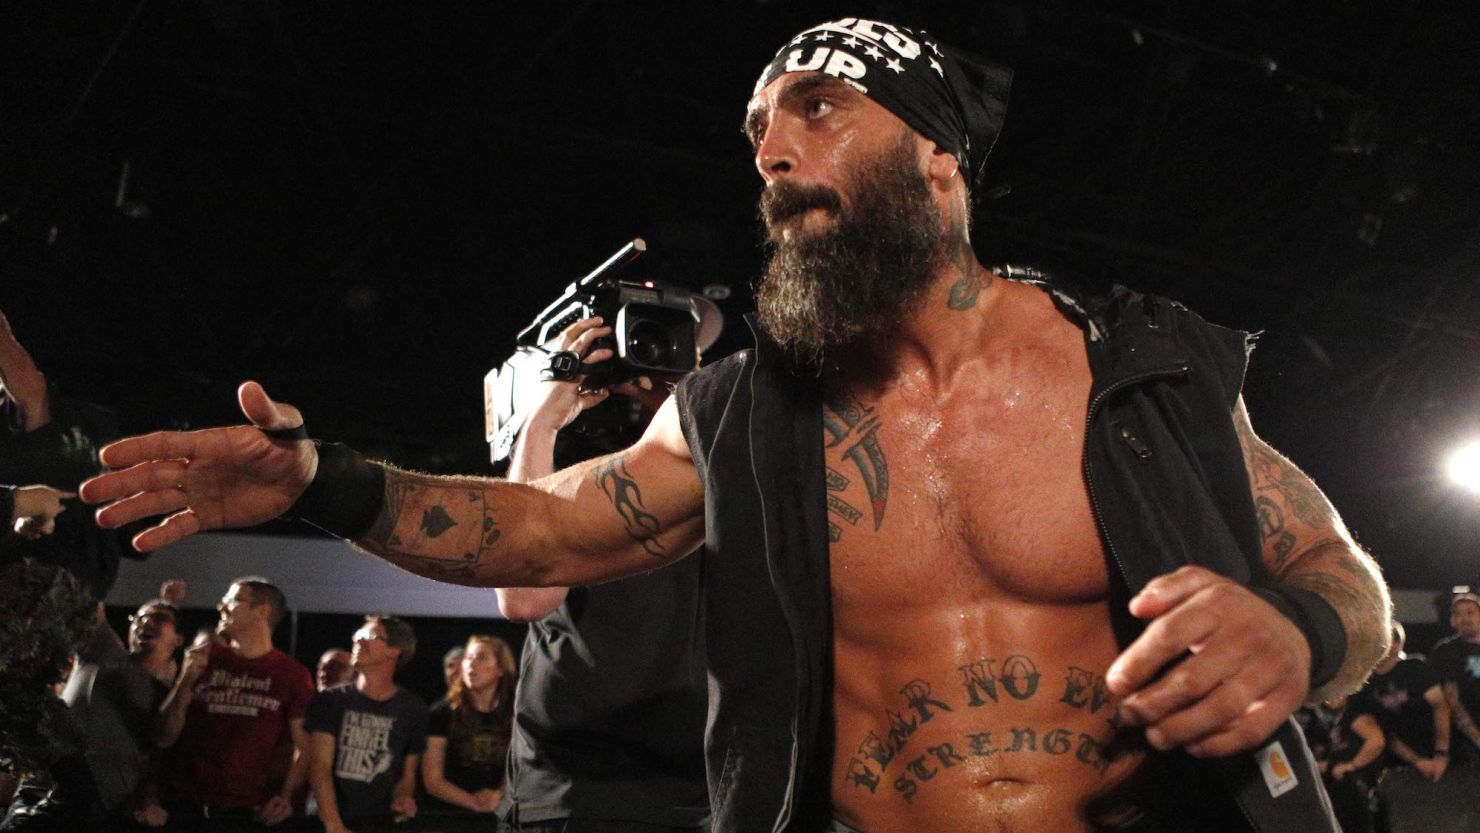 Briscoe's death was announced by Ring of Honor owner Tony Khan.